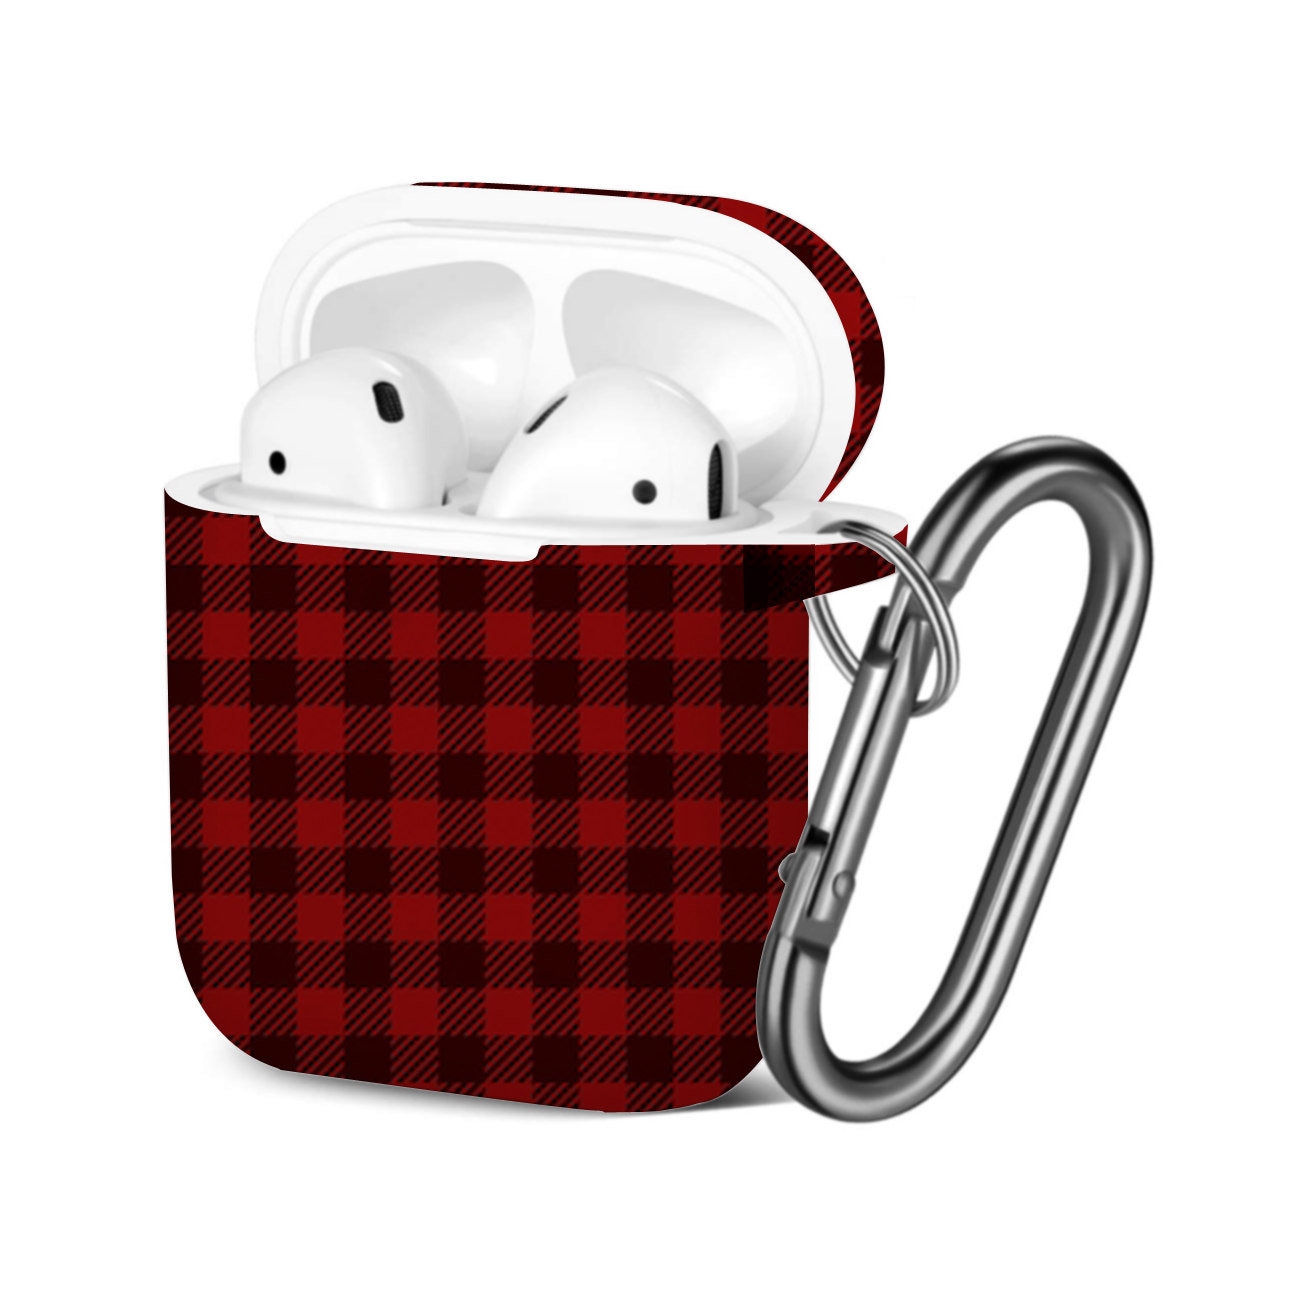 Light Beige and Red Plaid Airpods Case Matte Airpods Pro 